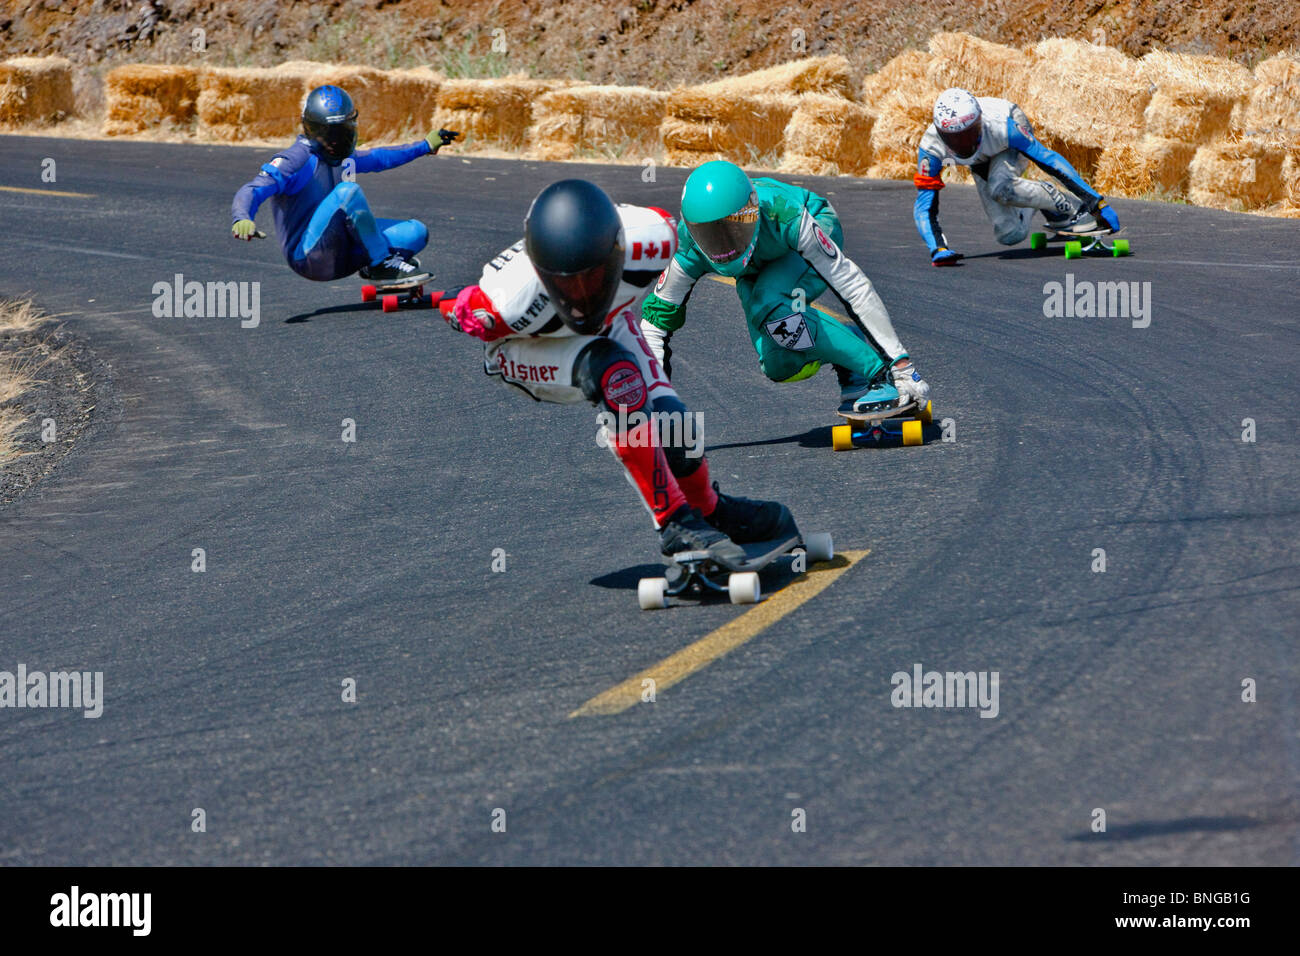 Skateboarders competing, IGSA, World Cup Series, Stock Photo